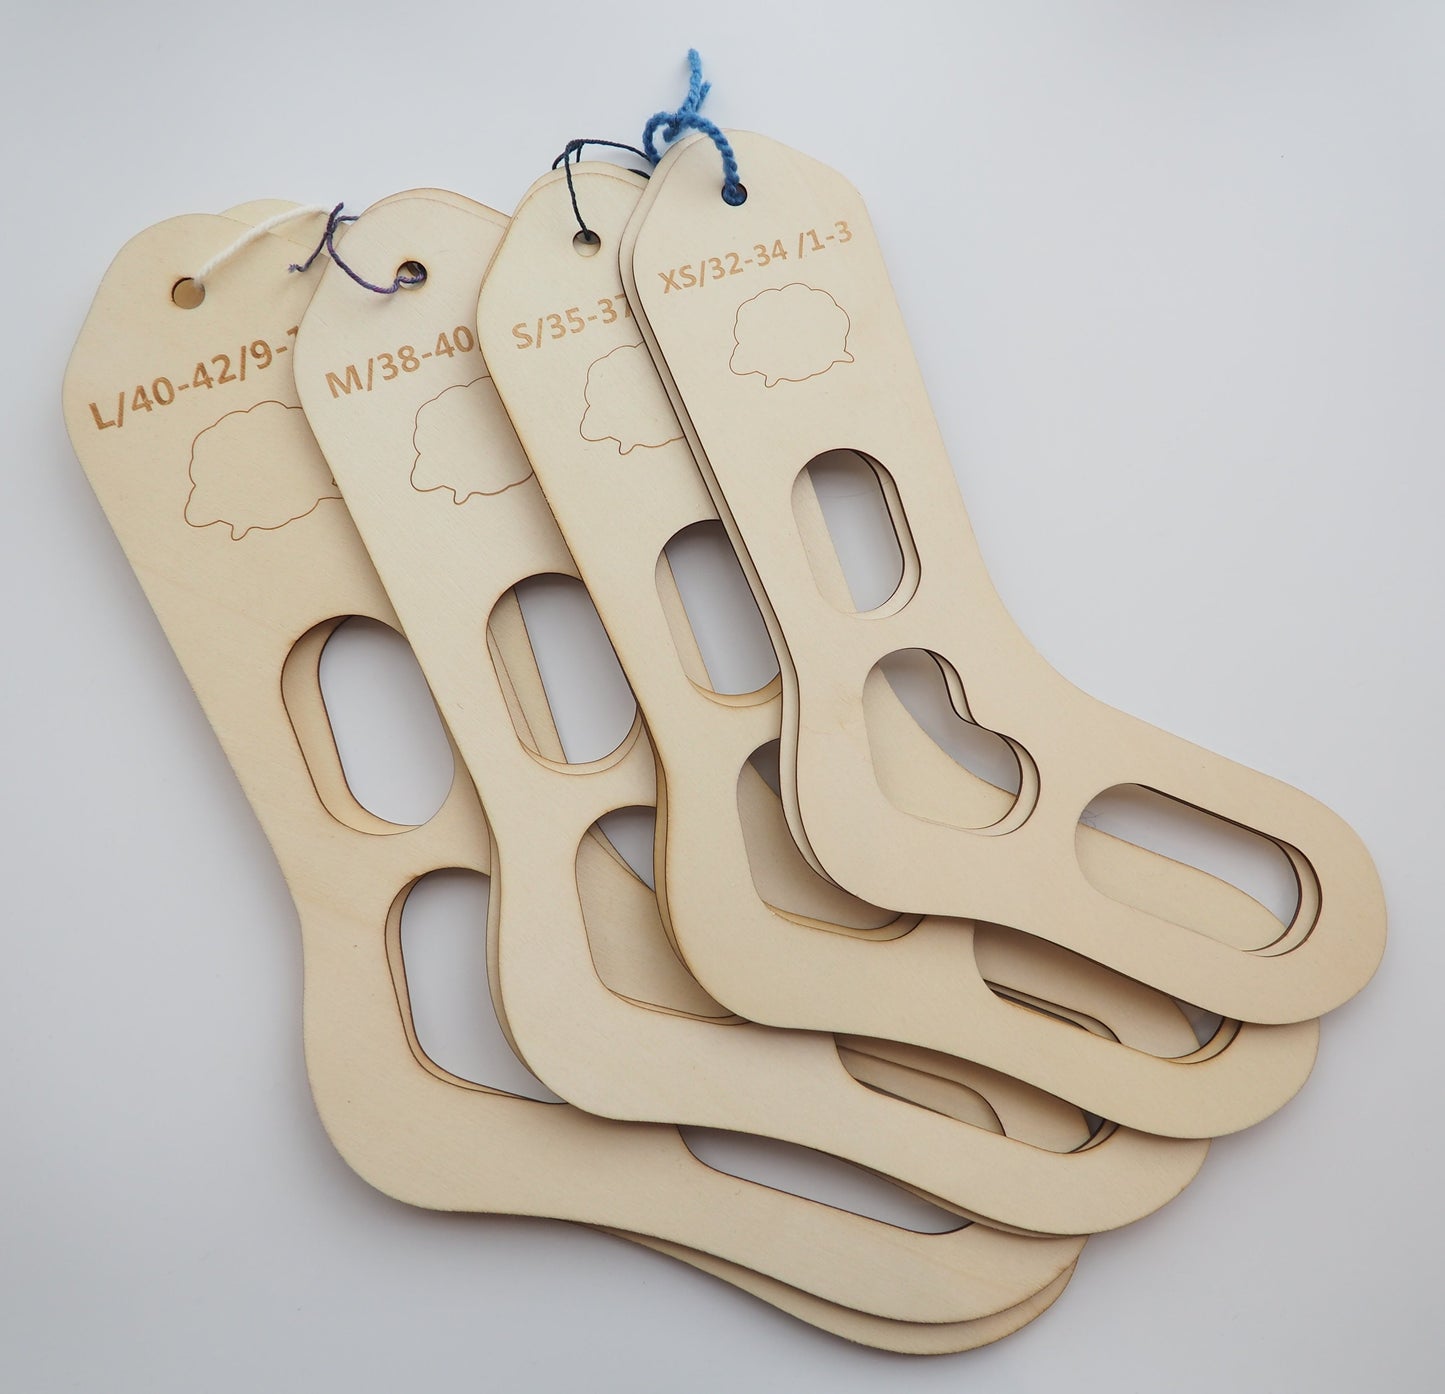 image of 4 sets of wooden sock blockers in sizes extras small, small, medium, and large. 